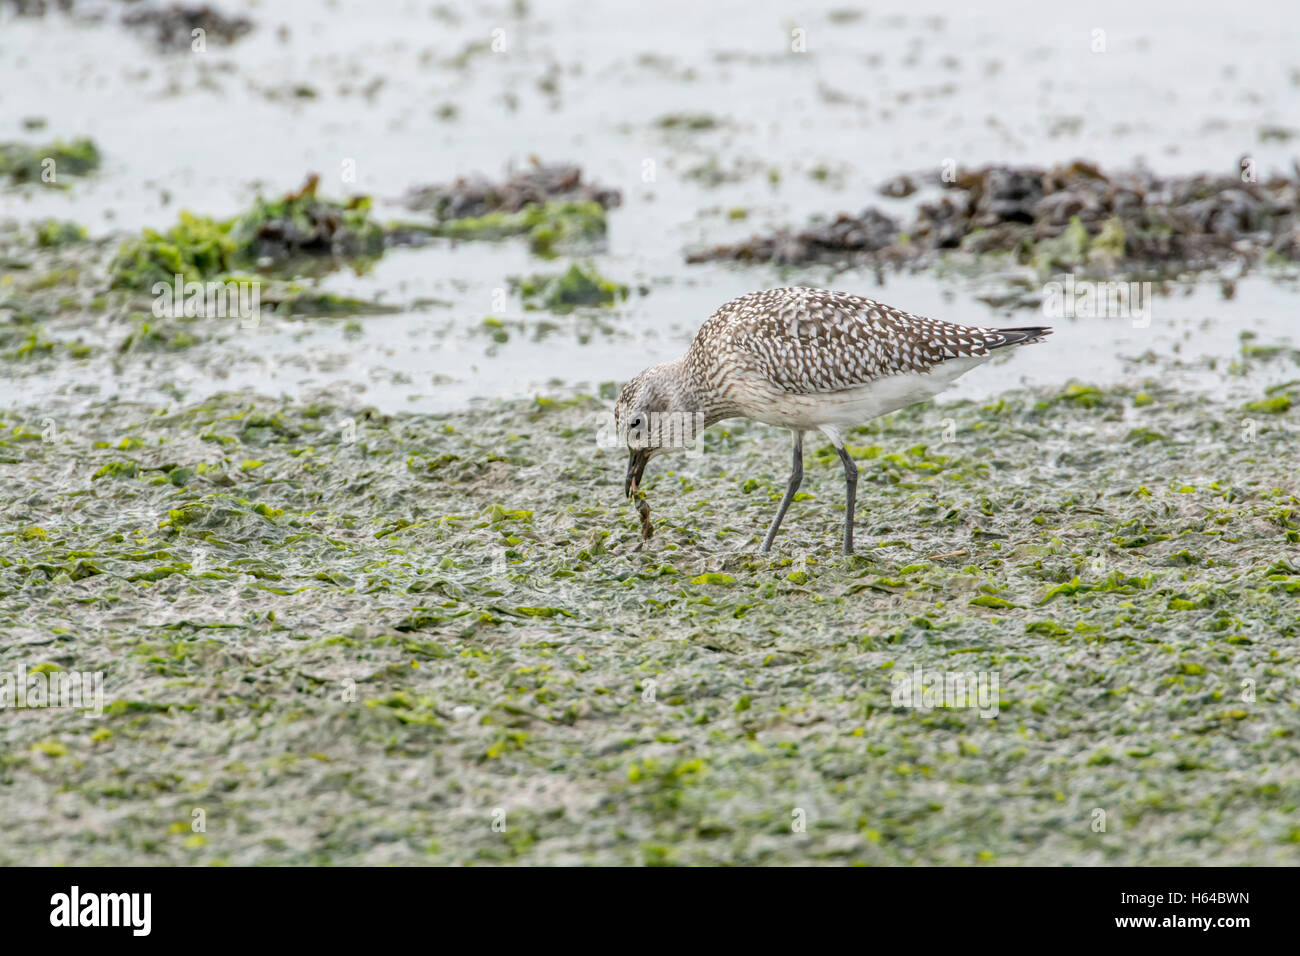 Grey plover (Pluvialis squatarola), in winter plumage, foraging on mudflats. The bird is eating a marine worm. Stock Photo